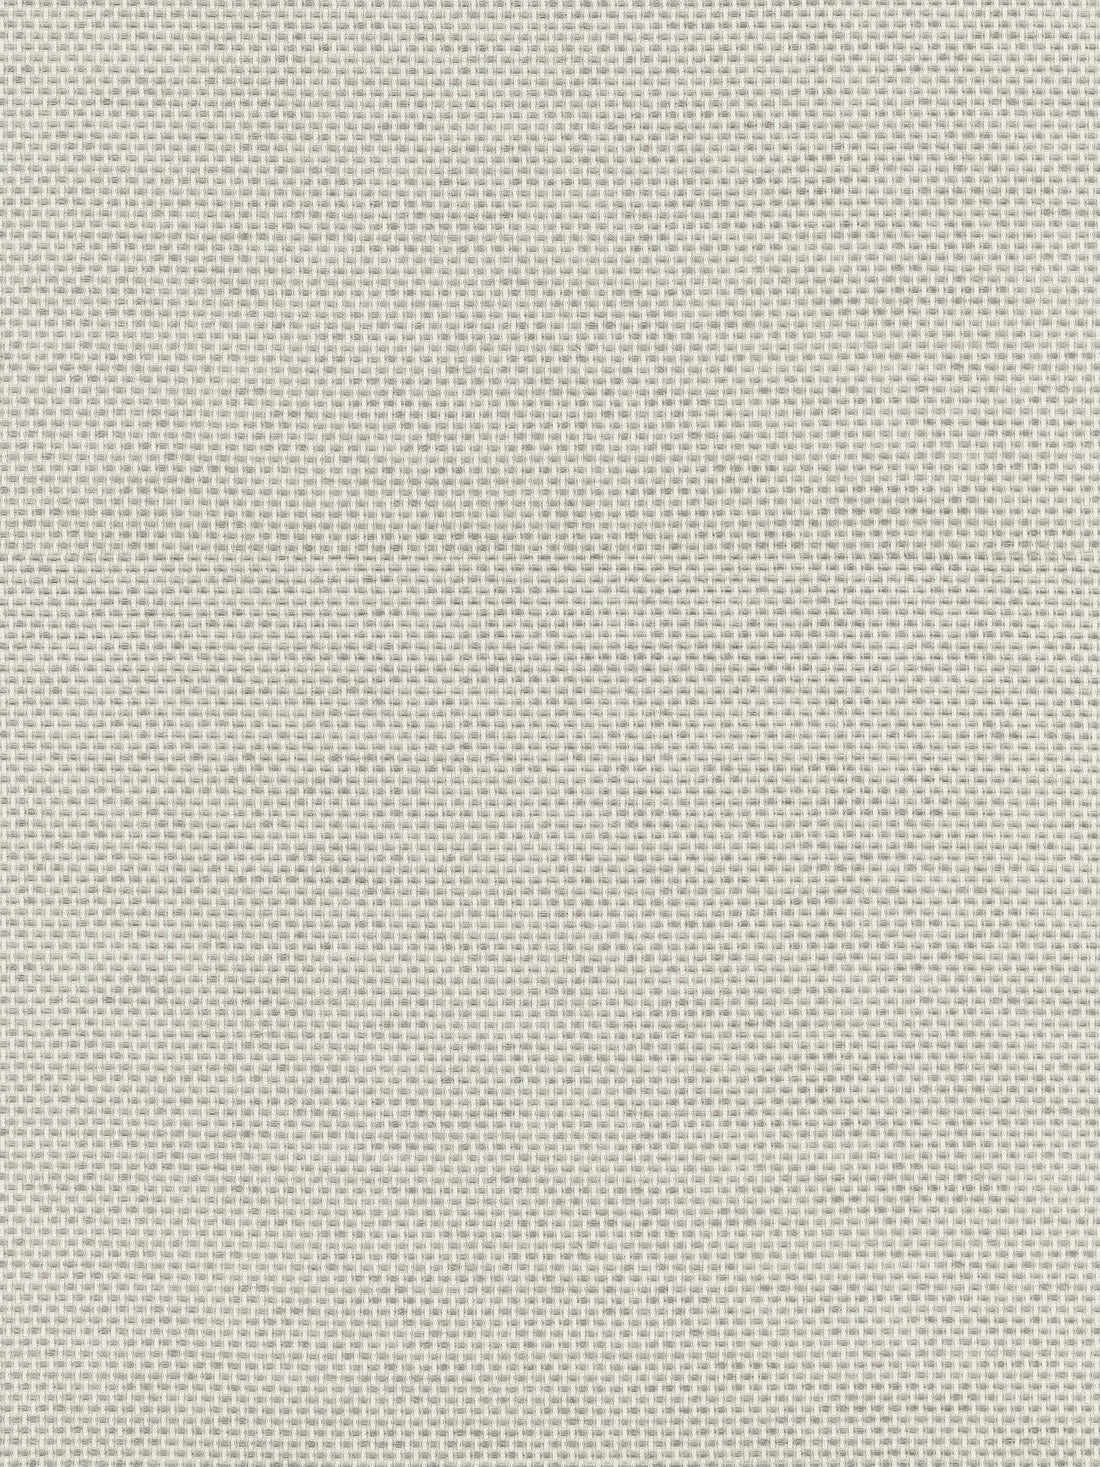 Berkshire Weave fabric in nickel color - pattern number BK 0003K65115 - by Scalamandre in the Old World Weavers collection